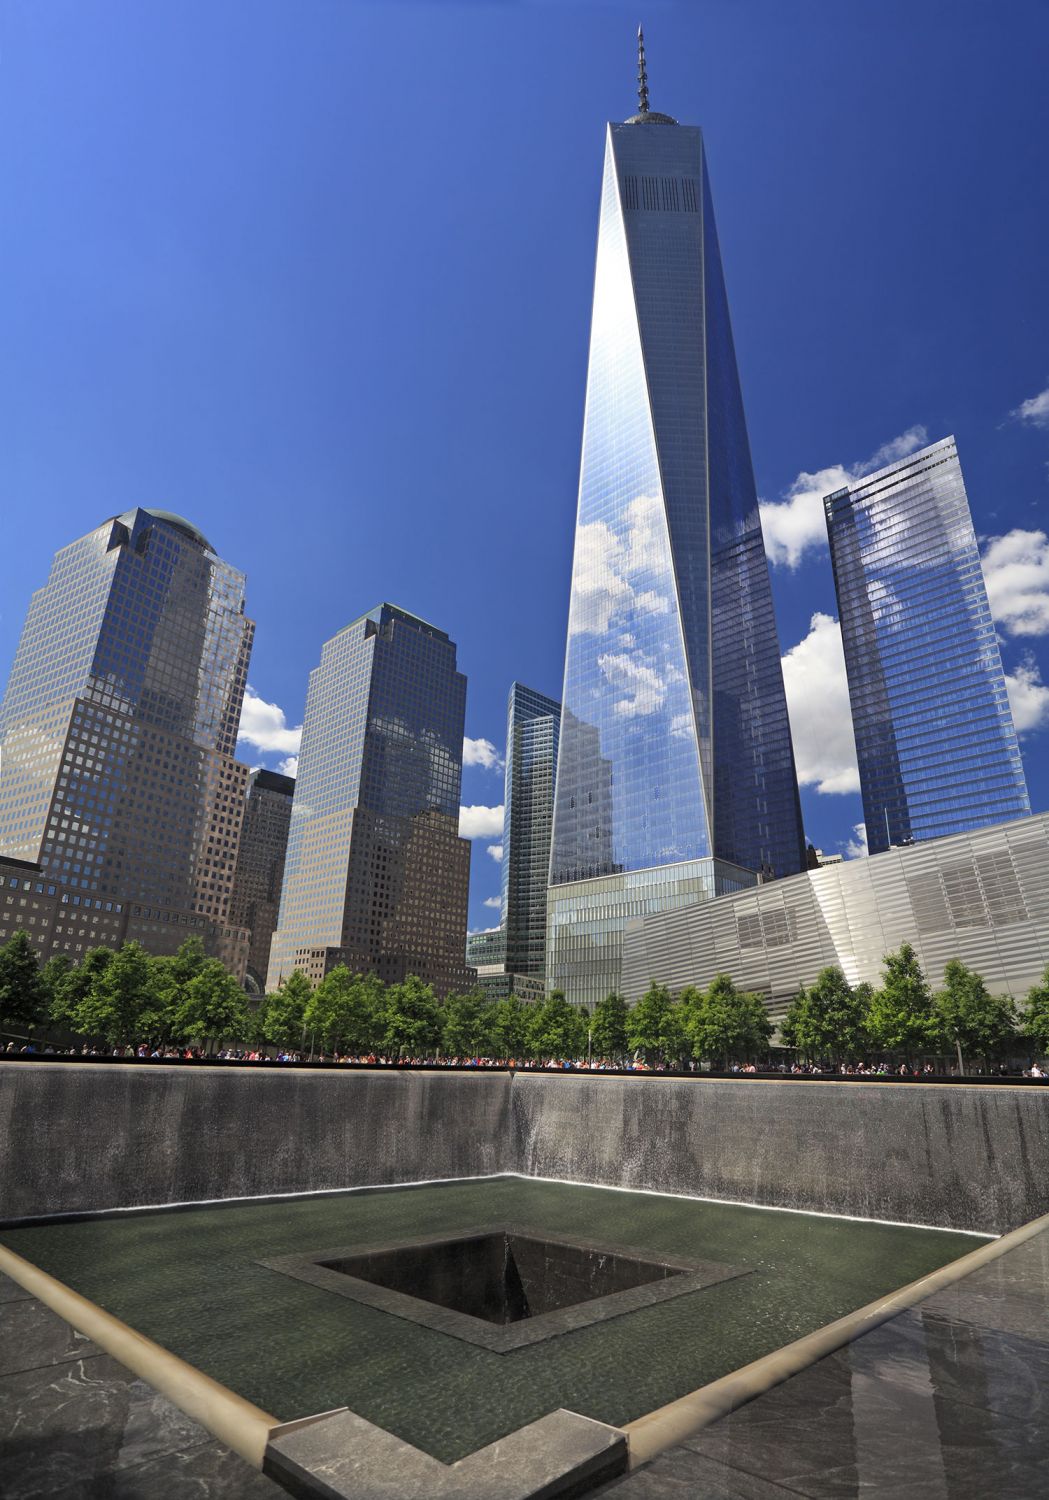 The 9/11 Memorial Plaza, showing one of the fountains with skyscrapers in the background